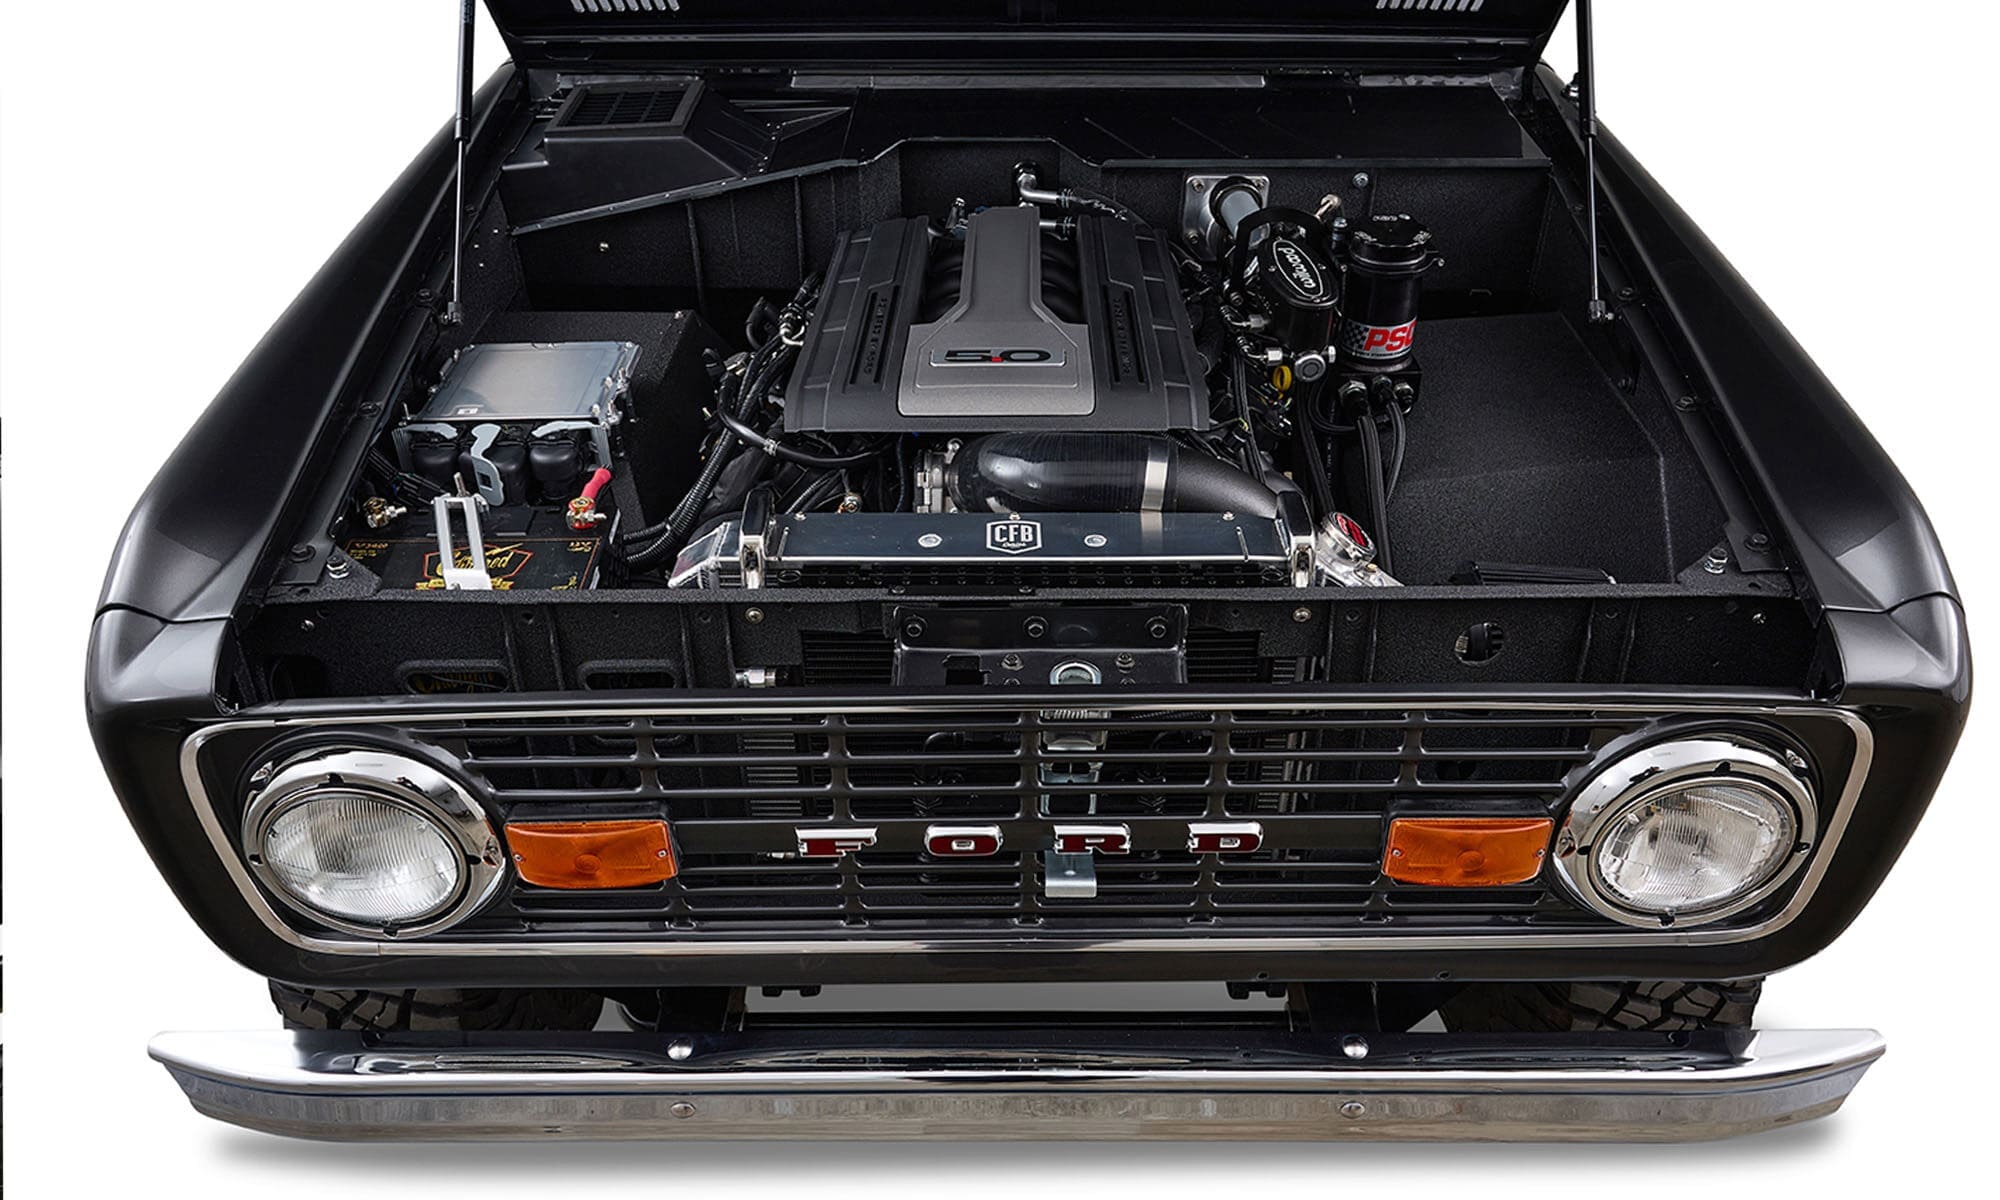 1969 For Bronco 302 Series in Magnetic Gray Coyote 5.0L Engine